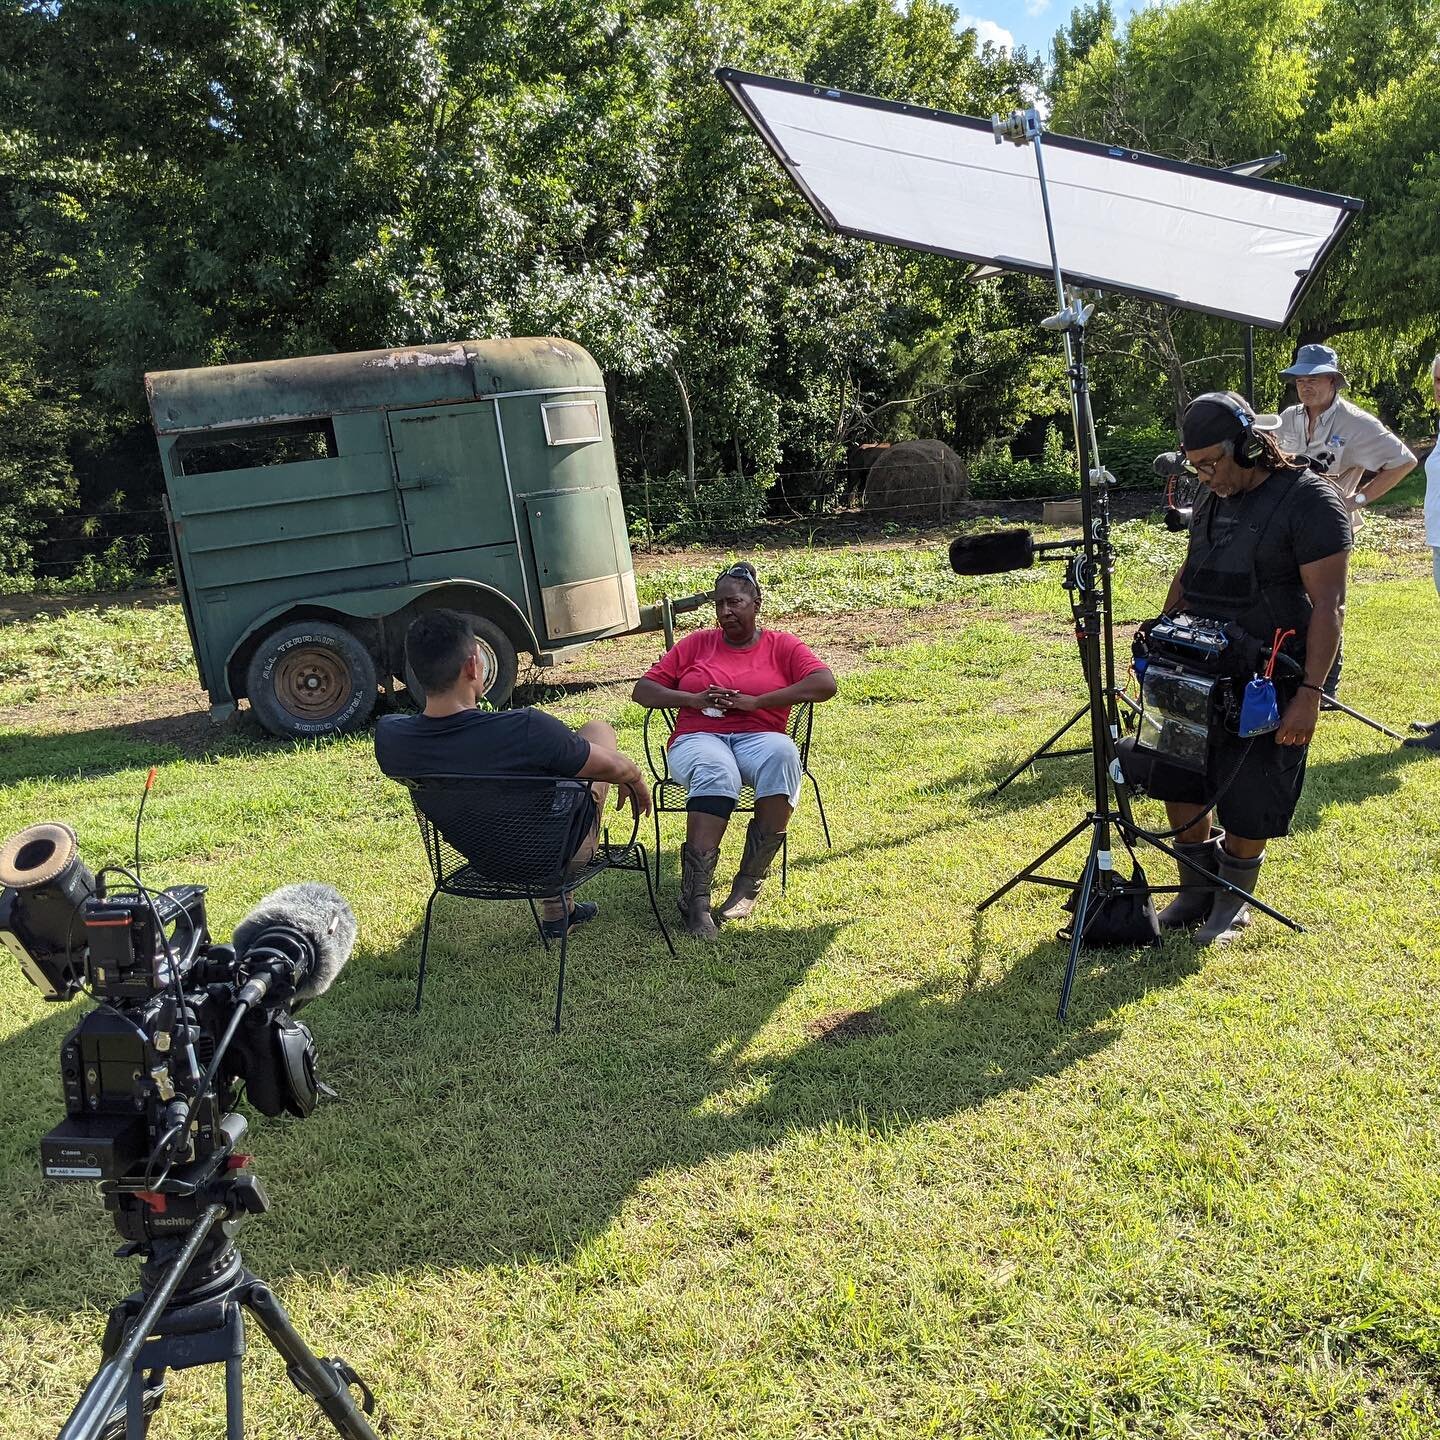 Lowndes County, AL resident &amp; @bbuwp member, Perman Hardy speaks with CBS&rsquo;s Adam Yamaguchi about her experience with a failing septic system that caused waste to back-up into her house through the toilets, tub, and sinks. #wastelandseries #